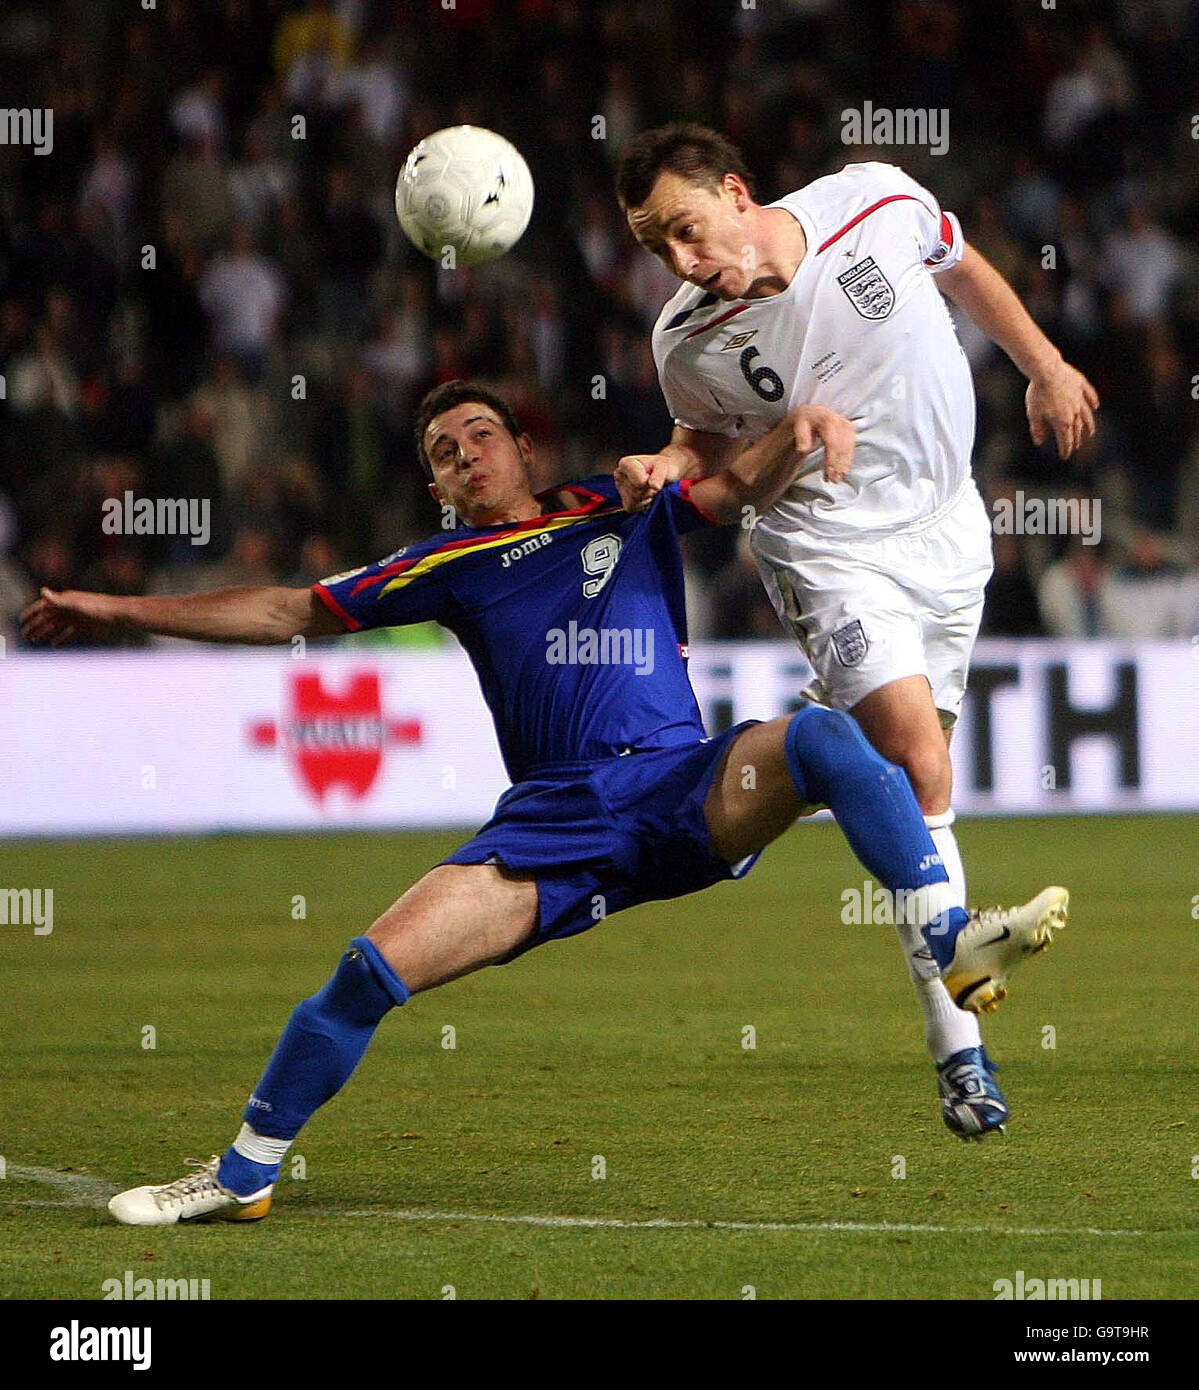 England captain John Terry (right) and Andorra's Juan Carlos Toscano battle for the ball during the UEFA European Championship Qualifying match at the Olimpico de Montjuic, Barcelona. Stock Photo